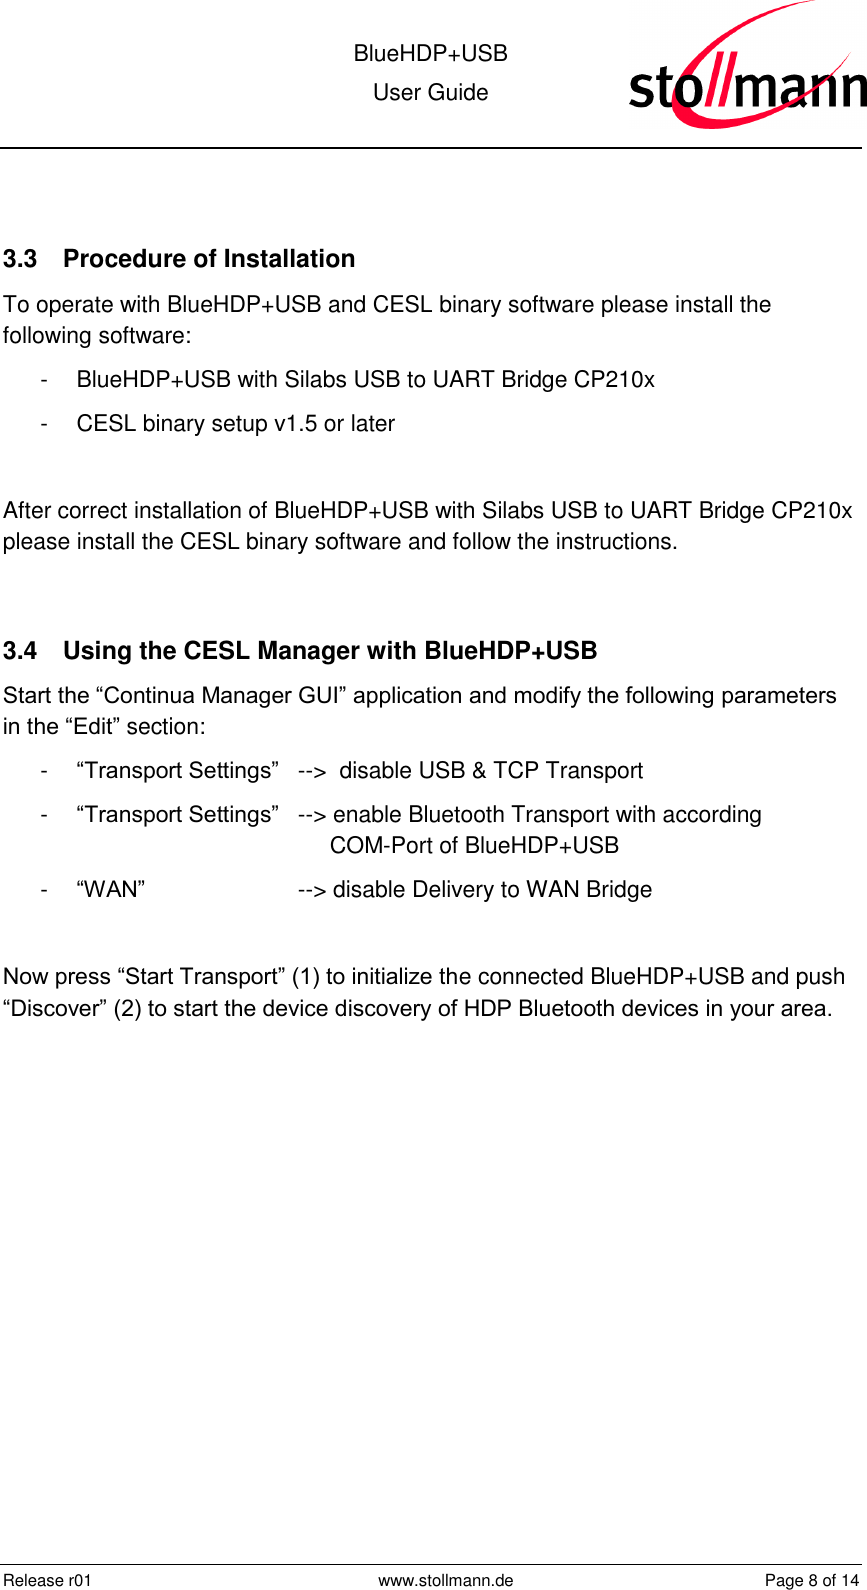  BlueHDP+USB User Guide  Release r01  www.stollmann.de  Page 8 of 14   3.3  Procedure of Installation To operate with BlueHDP+USB and CESL binary software please install the following software: -  BlueHDP+USB with Silabs USB to UART Bridge CP210x -  CESL binary setup v1.5 or later  After correct installation of BlueHDP+USB with Silabs USB to UART Bridge CP210x please install the CESL binary software and follow the instructions.  3.4  Using the CESL Manager with BlueHDP+USB Start the “Continua Manager GUI” application and modify the following parameters in the “Edit” section: -  “Transport Settings” --&gt;  disable USB &amp; TCP Transport -  “Transport Settings” --&gt; enable Bluetooth Transport with according             COM-Port of BlueHDP+USB -  “WAN”   --&gt; disable Delivery to WAN Bridge  Now press “Start Transport” (1) to initialize the connected BlueHDP+USB and push “Discover” (2) to start the device discovery of HDP Bluetooth devices in your area. 